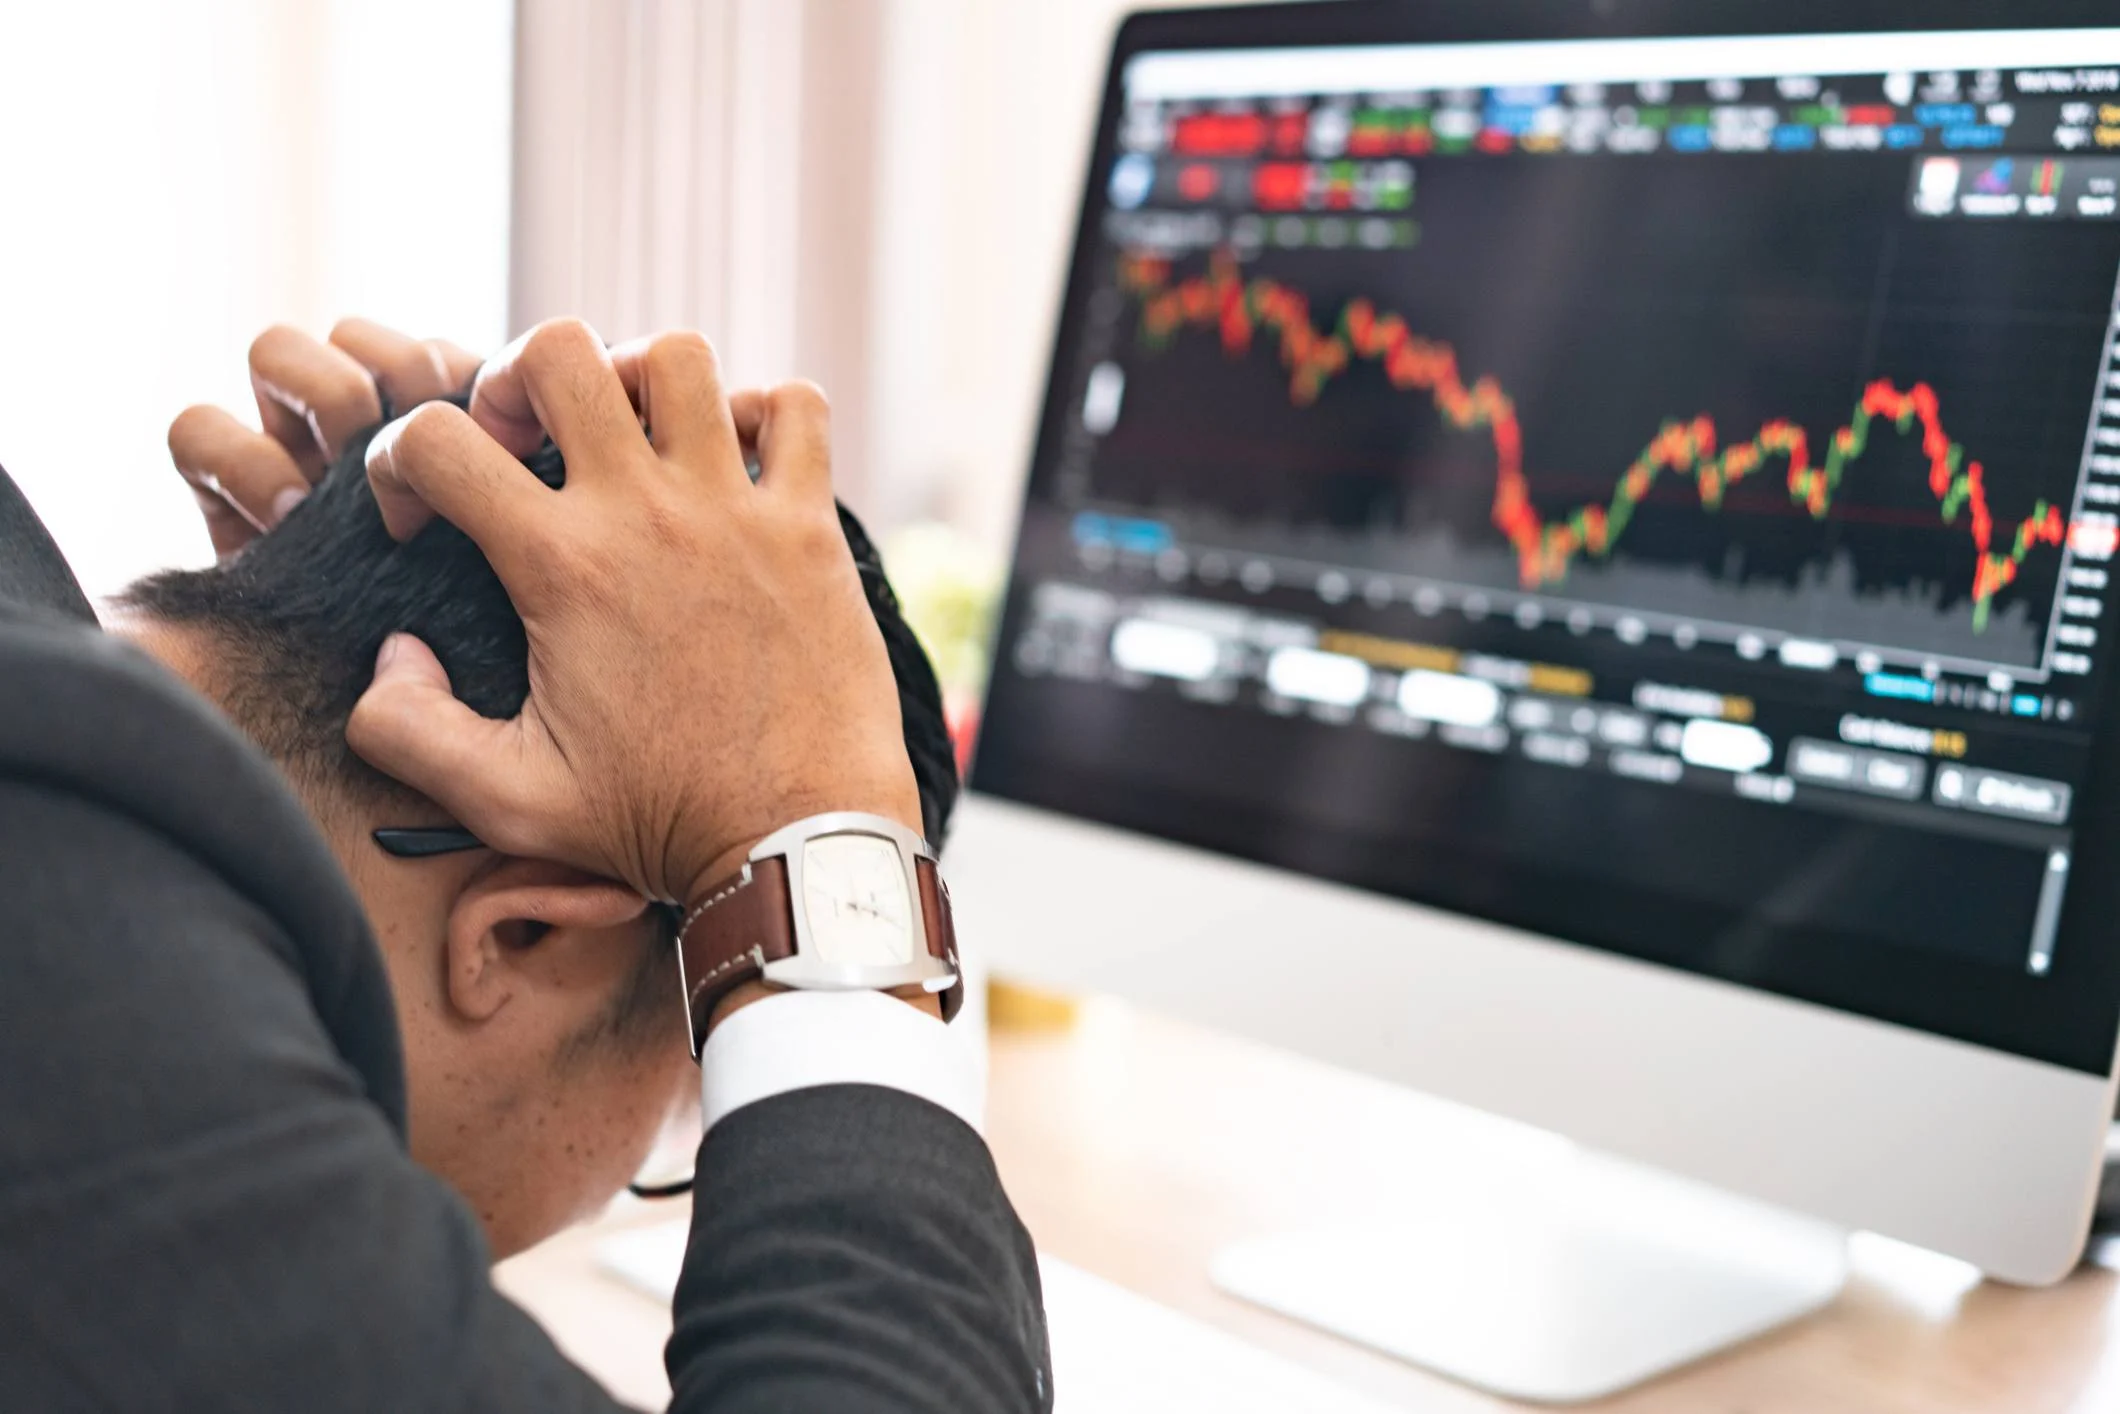 Overtrading: What Is It, and How Can You Avoid It?